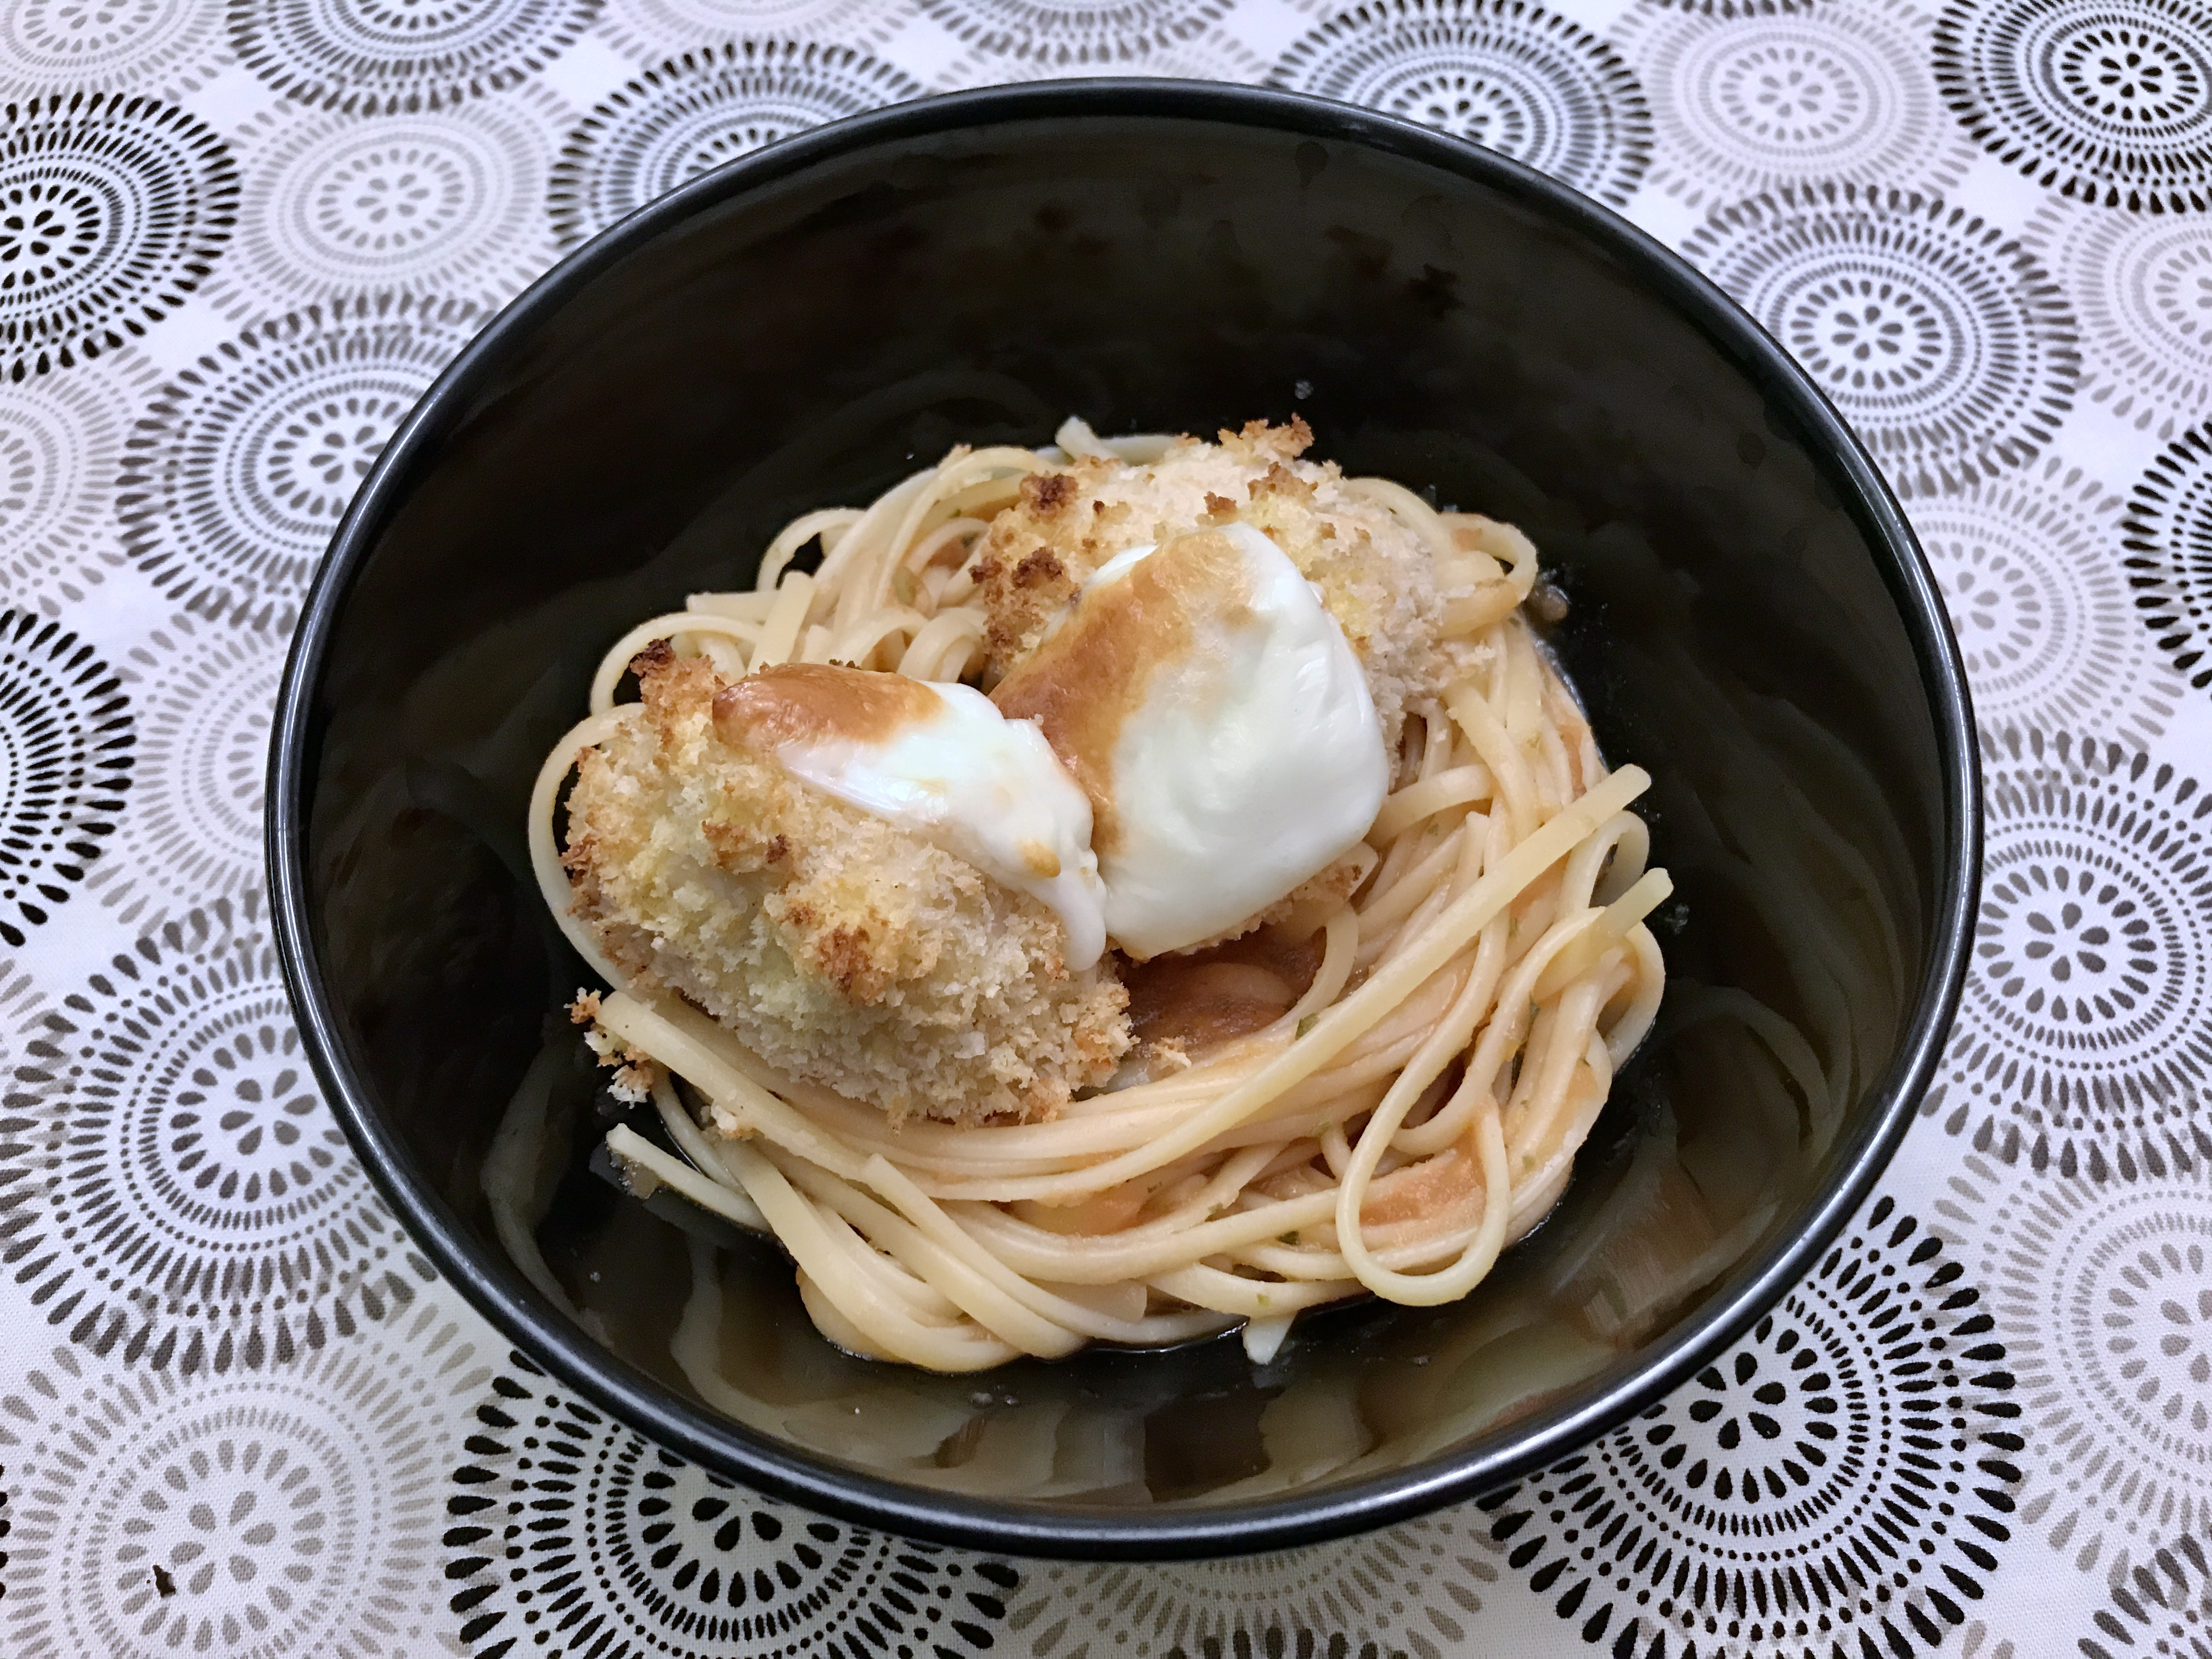 A bowl of linguini with two pieces of mozzarella-topped golden brown breaded chicken nestled on top.